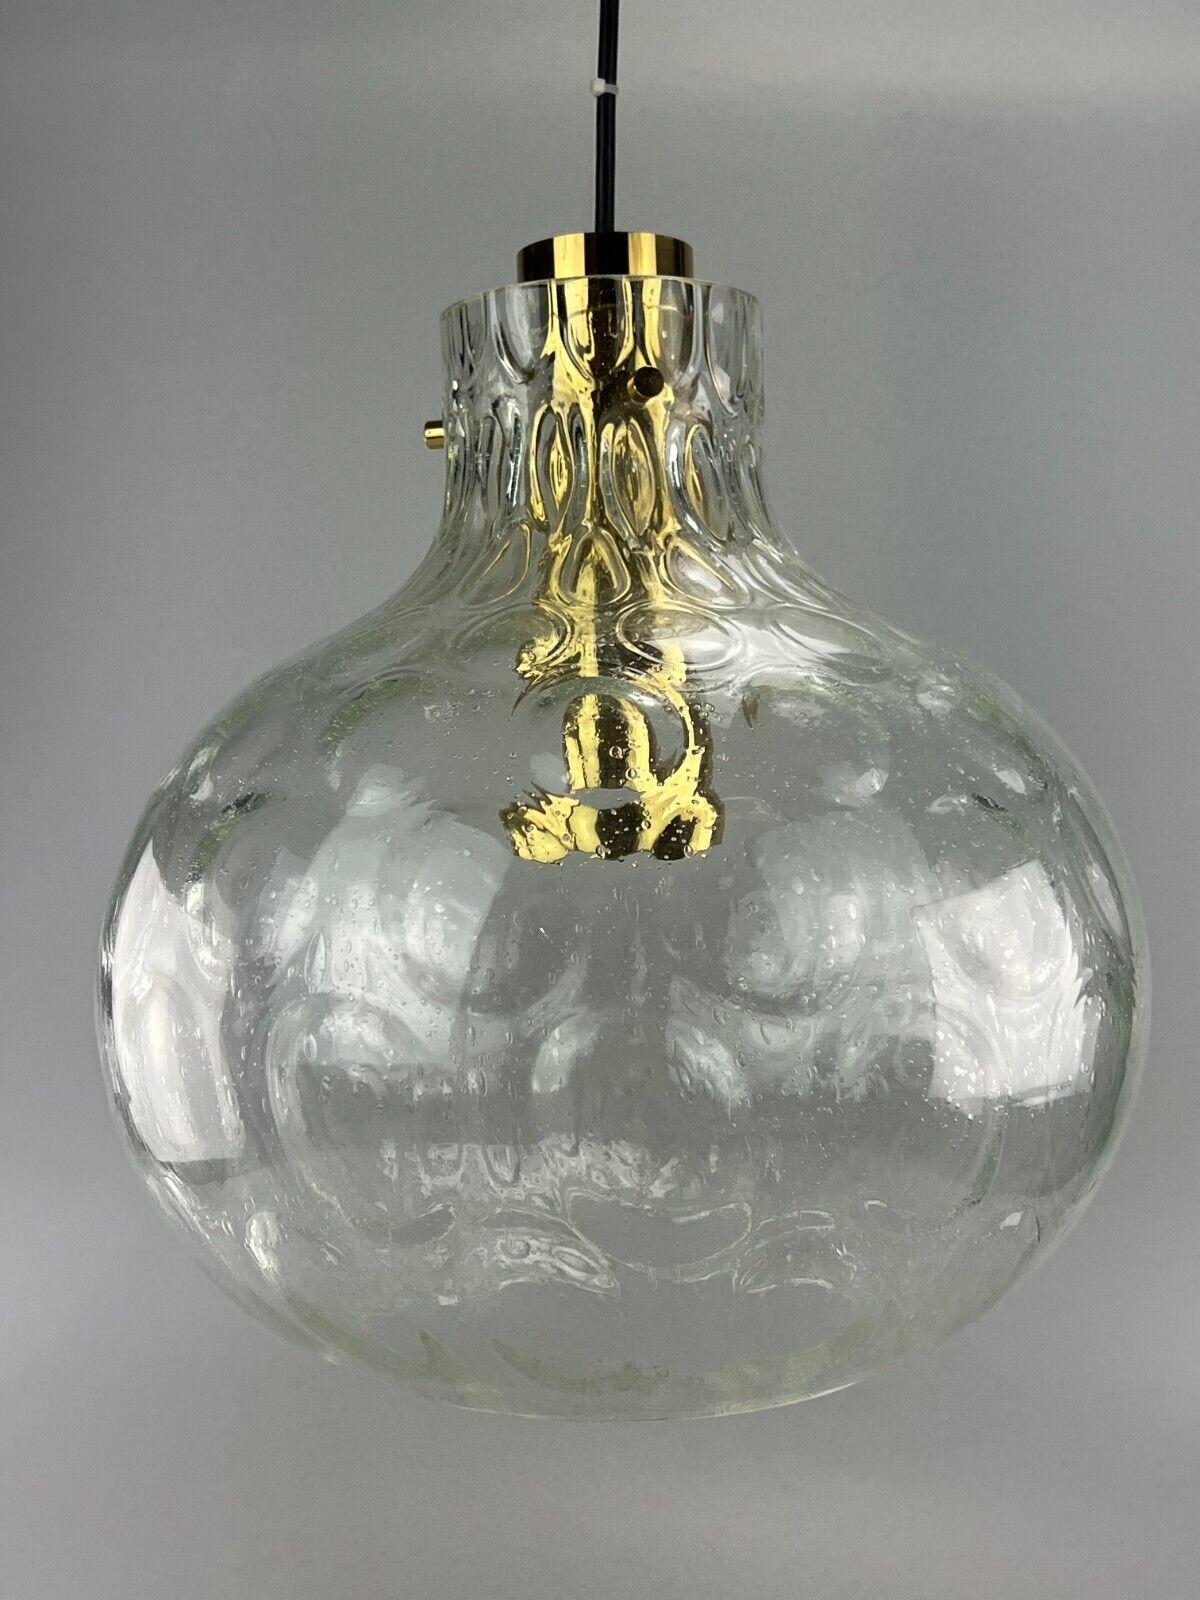 60s 70s lamp light ceiling lamp Limburg Germany glass space age design

Object: ceiling lamp

Manufacturer: Glashütte Limburg

Condition: good

Age: around 1960-1970

Dimensions:

Diameter = 34cm
Height = 36.5cm

Other notes:

E27 socket

The